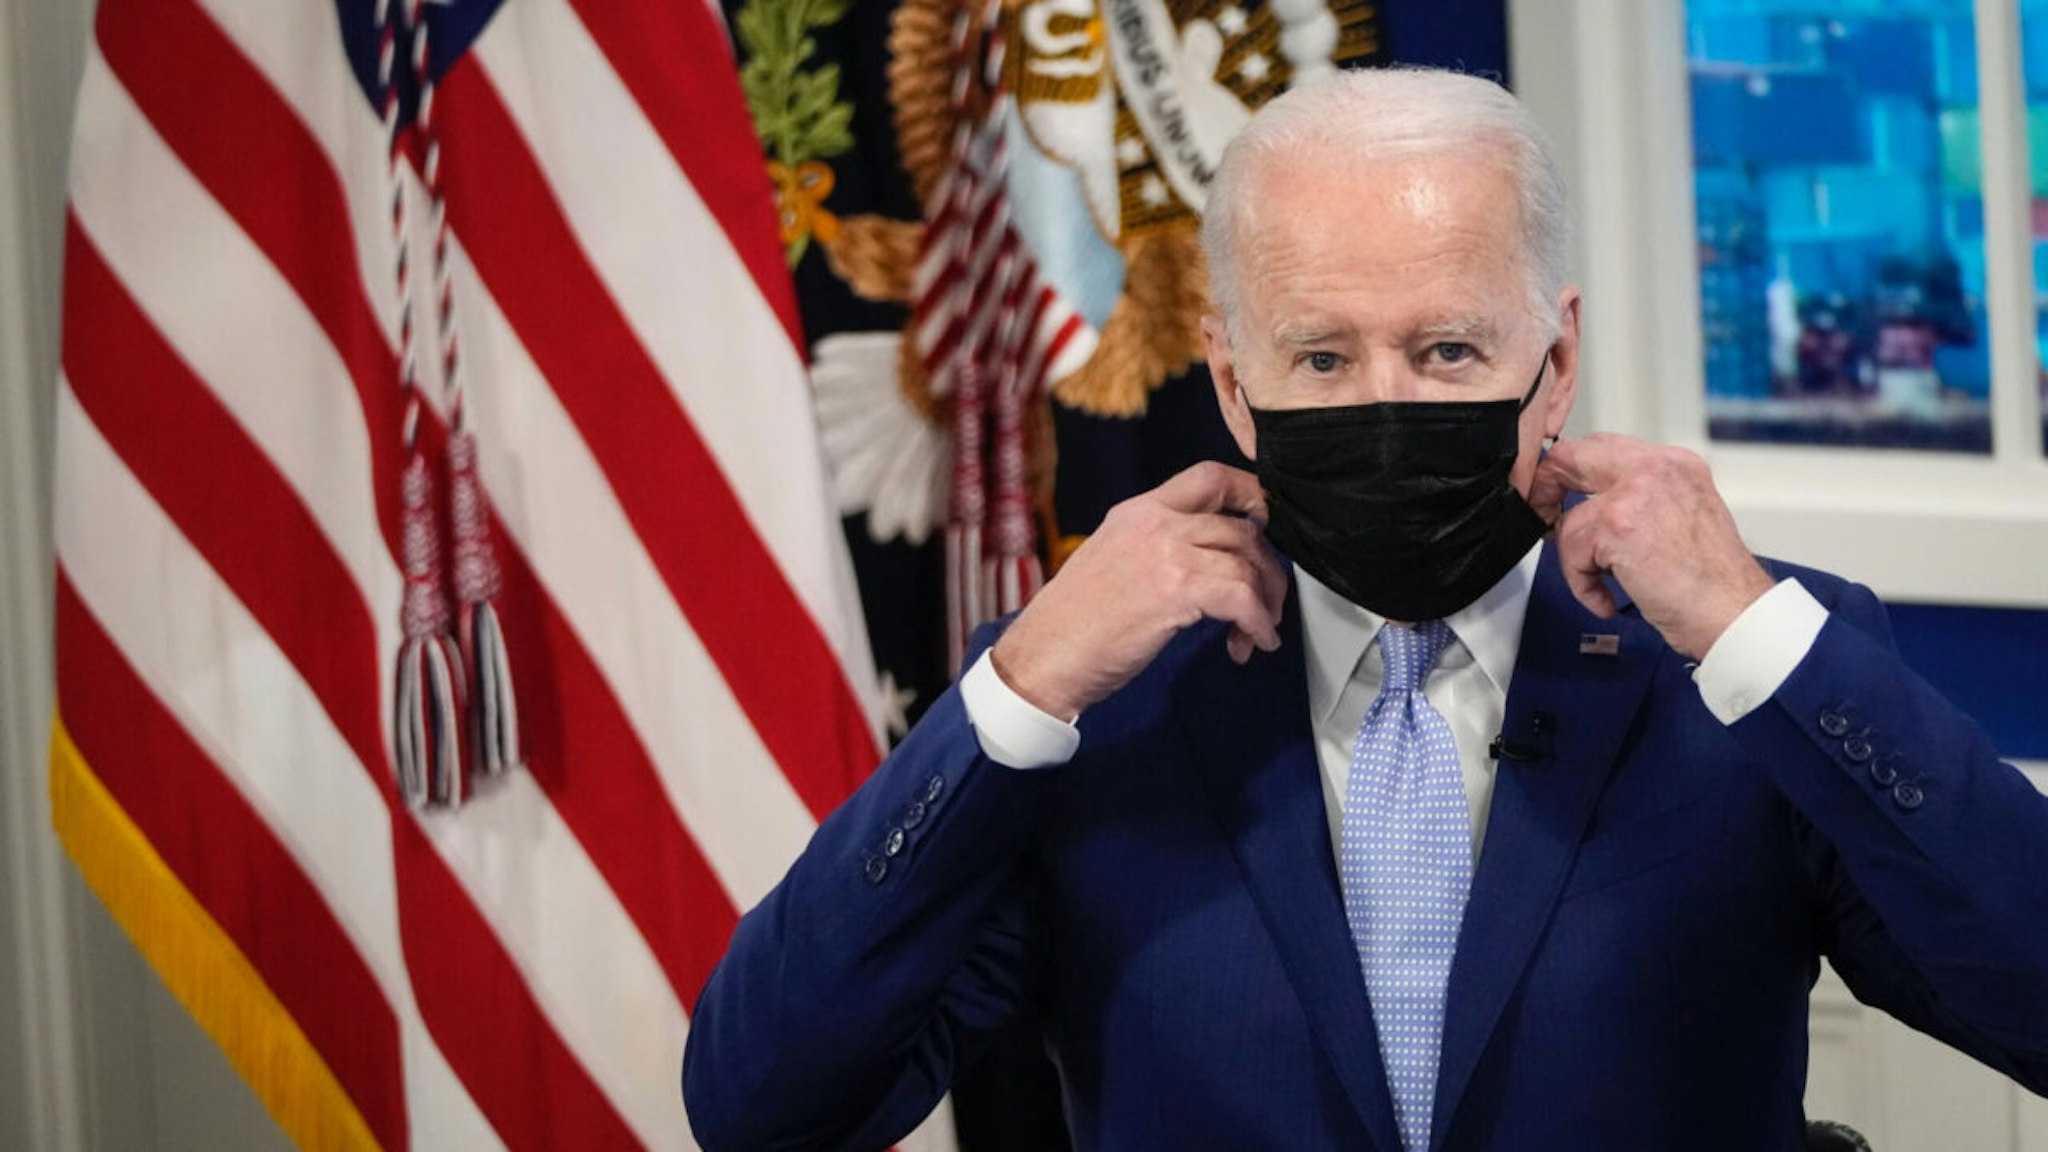 U.S. President Joe Biden removes his mask before speaking during a meeting with his administration's Supply Chain Disruptions Task Force and private sector CEOs in the South Court Auditorium of the White House December 22, 2021 in Washington, DC.